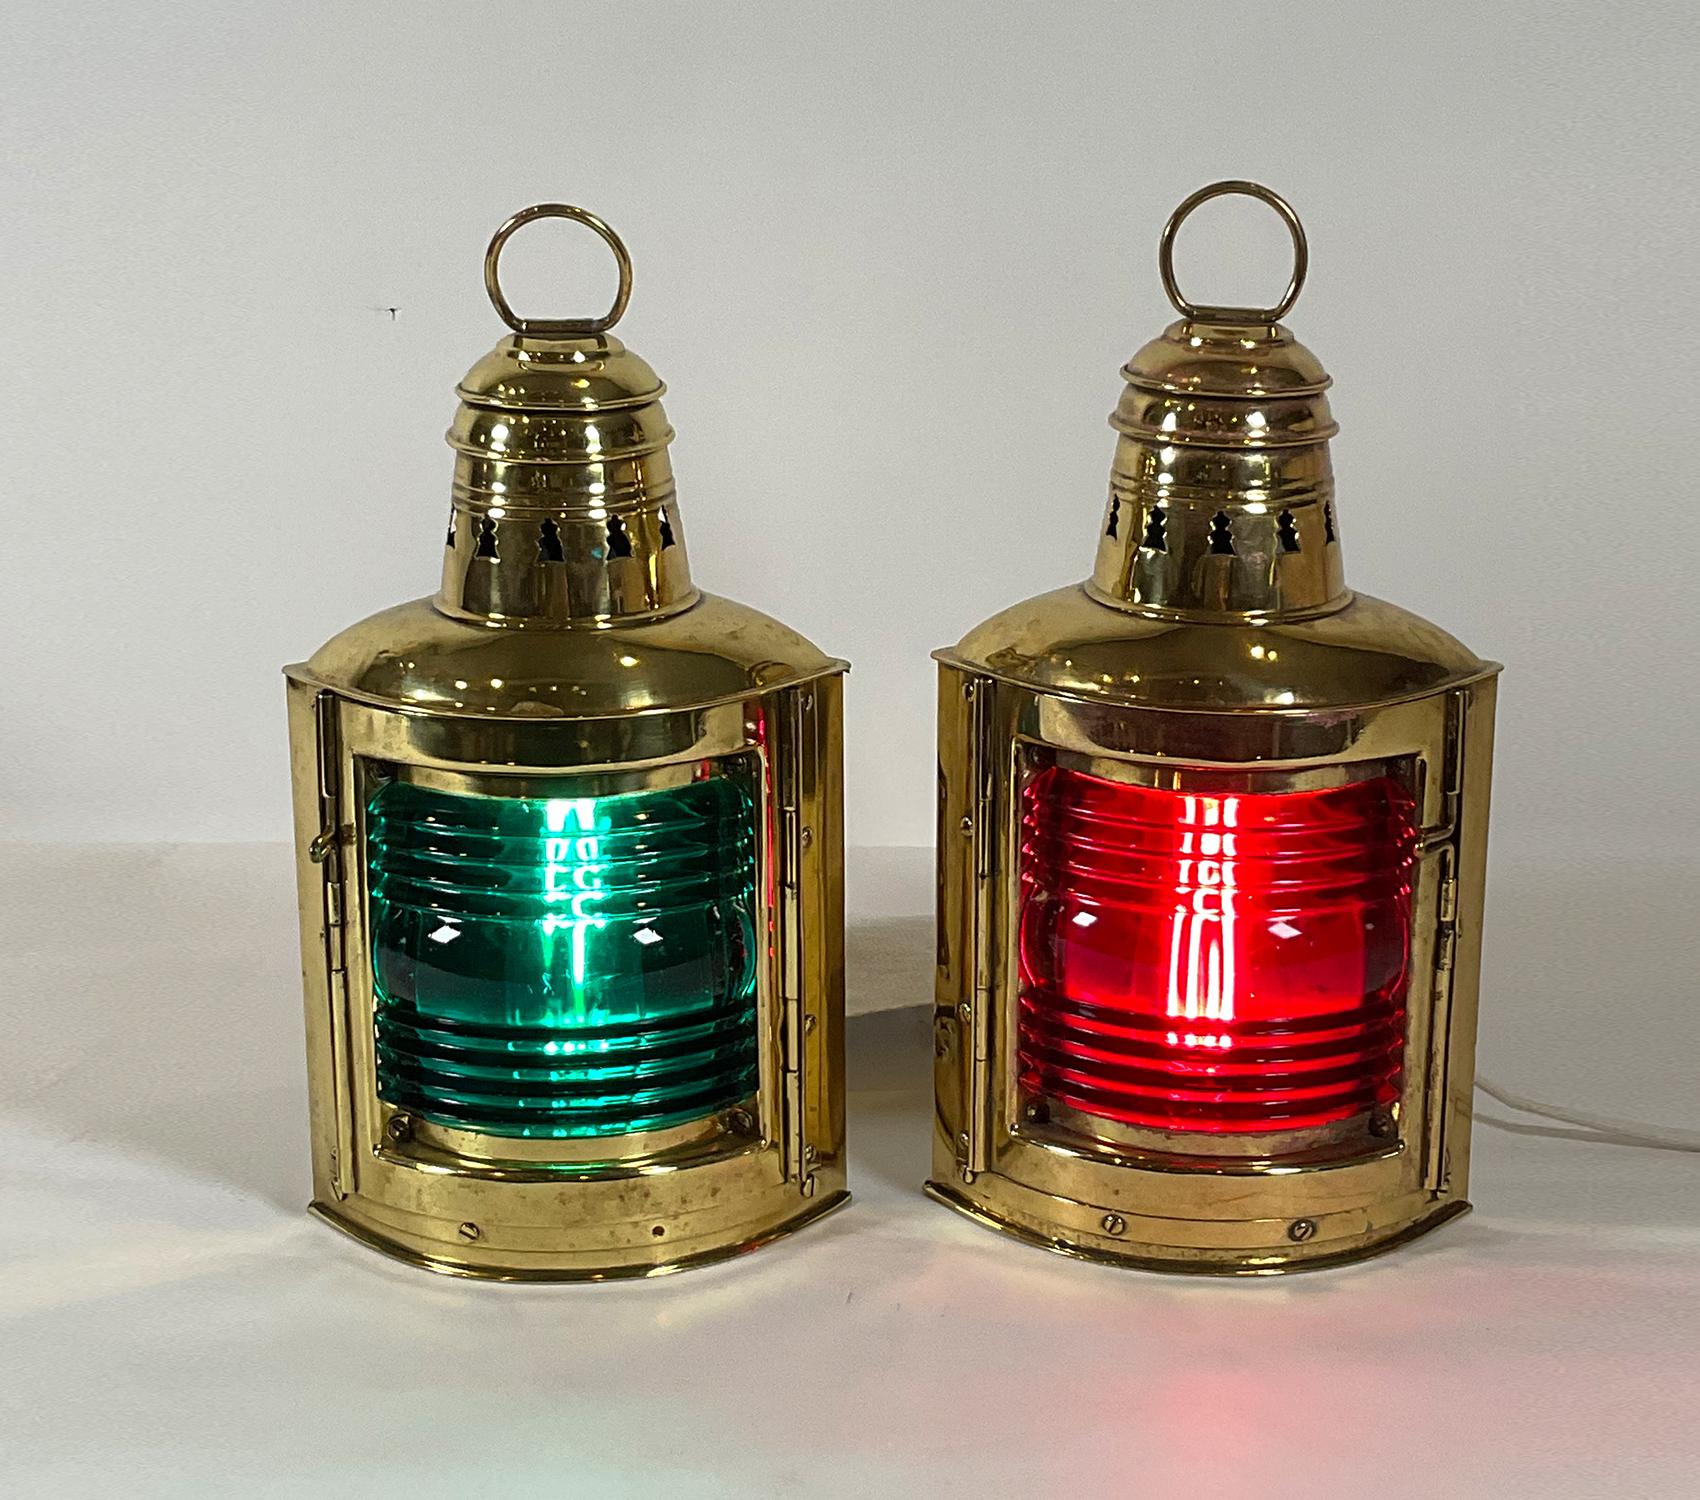 Port and starboard ship’s lanterns by Perkins Marine Hardware Corporation of Brooklyn, New York. Polished and lacquered. Hinged doors hold the richly colored red and blue Fresnel glass lenses. Both are wired for home use.

Weight: 7 LBS
Overall